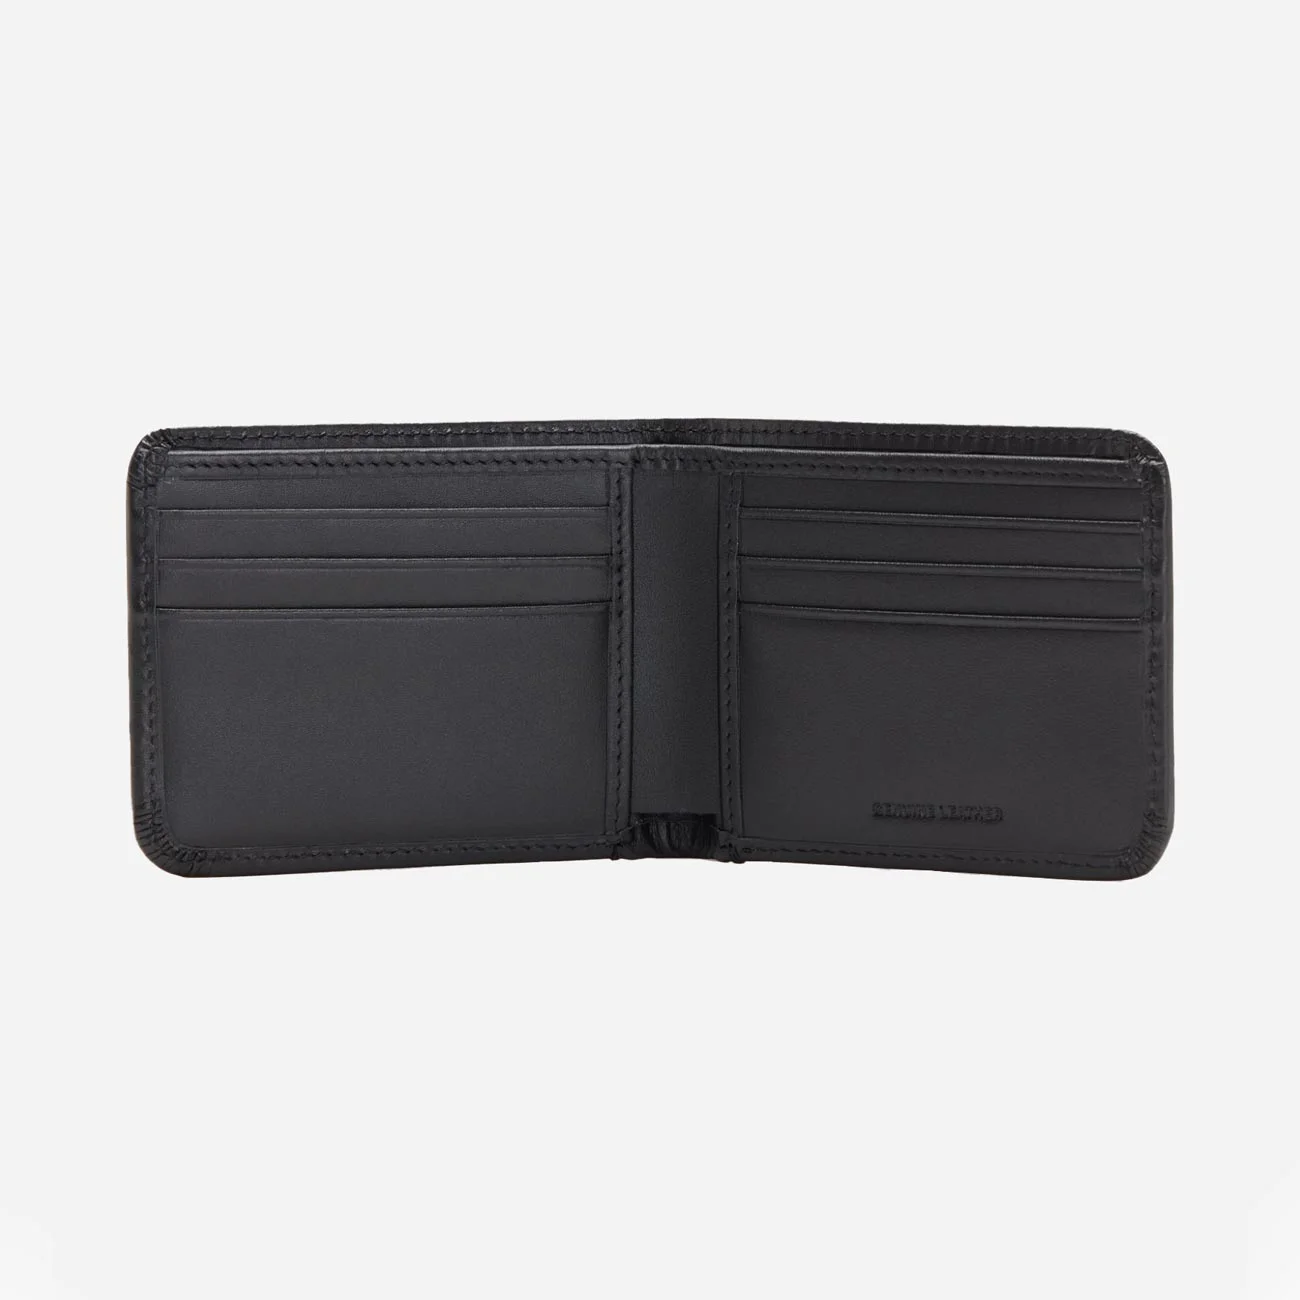 Fred Perry Leather Studded Bi Fold Wallet - Black